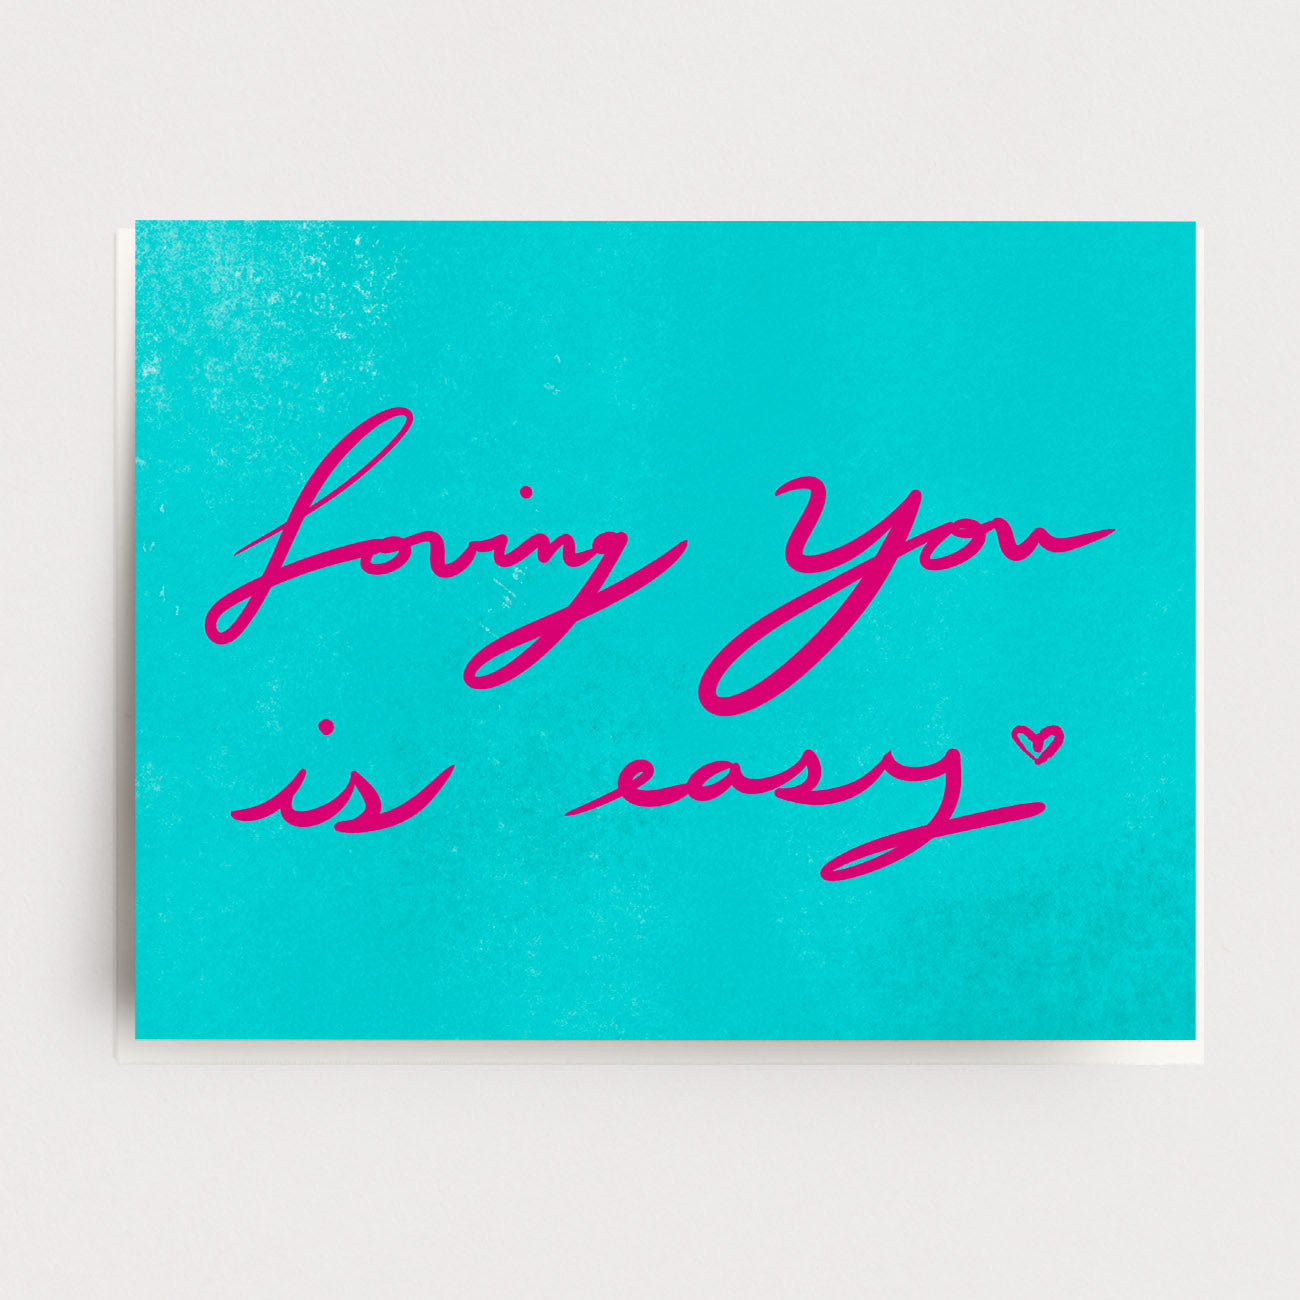 Loving You is Easy Card